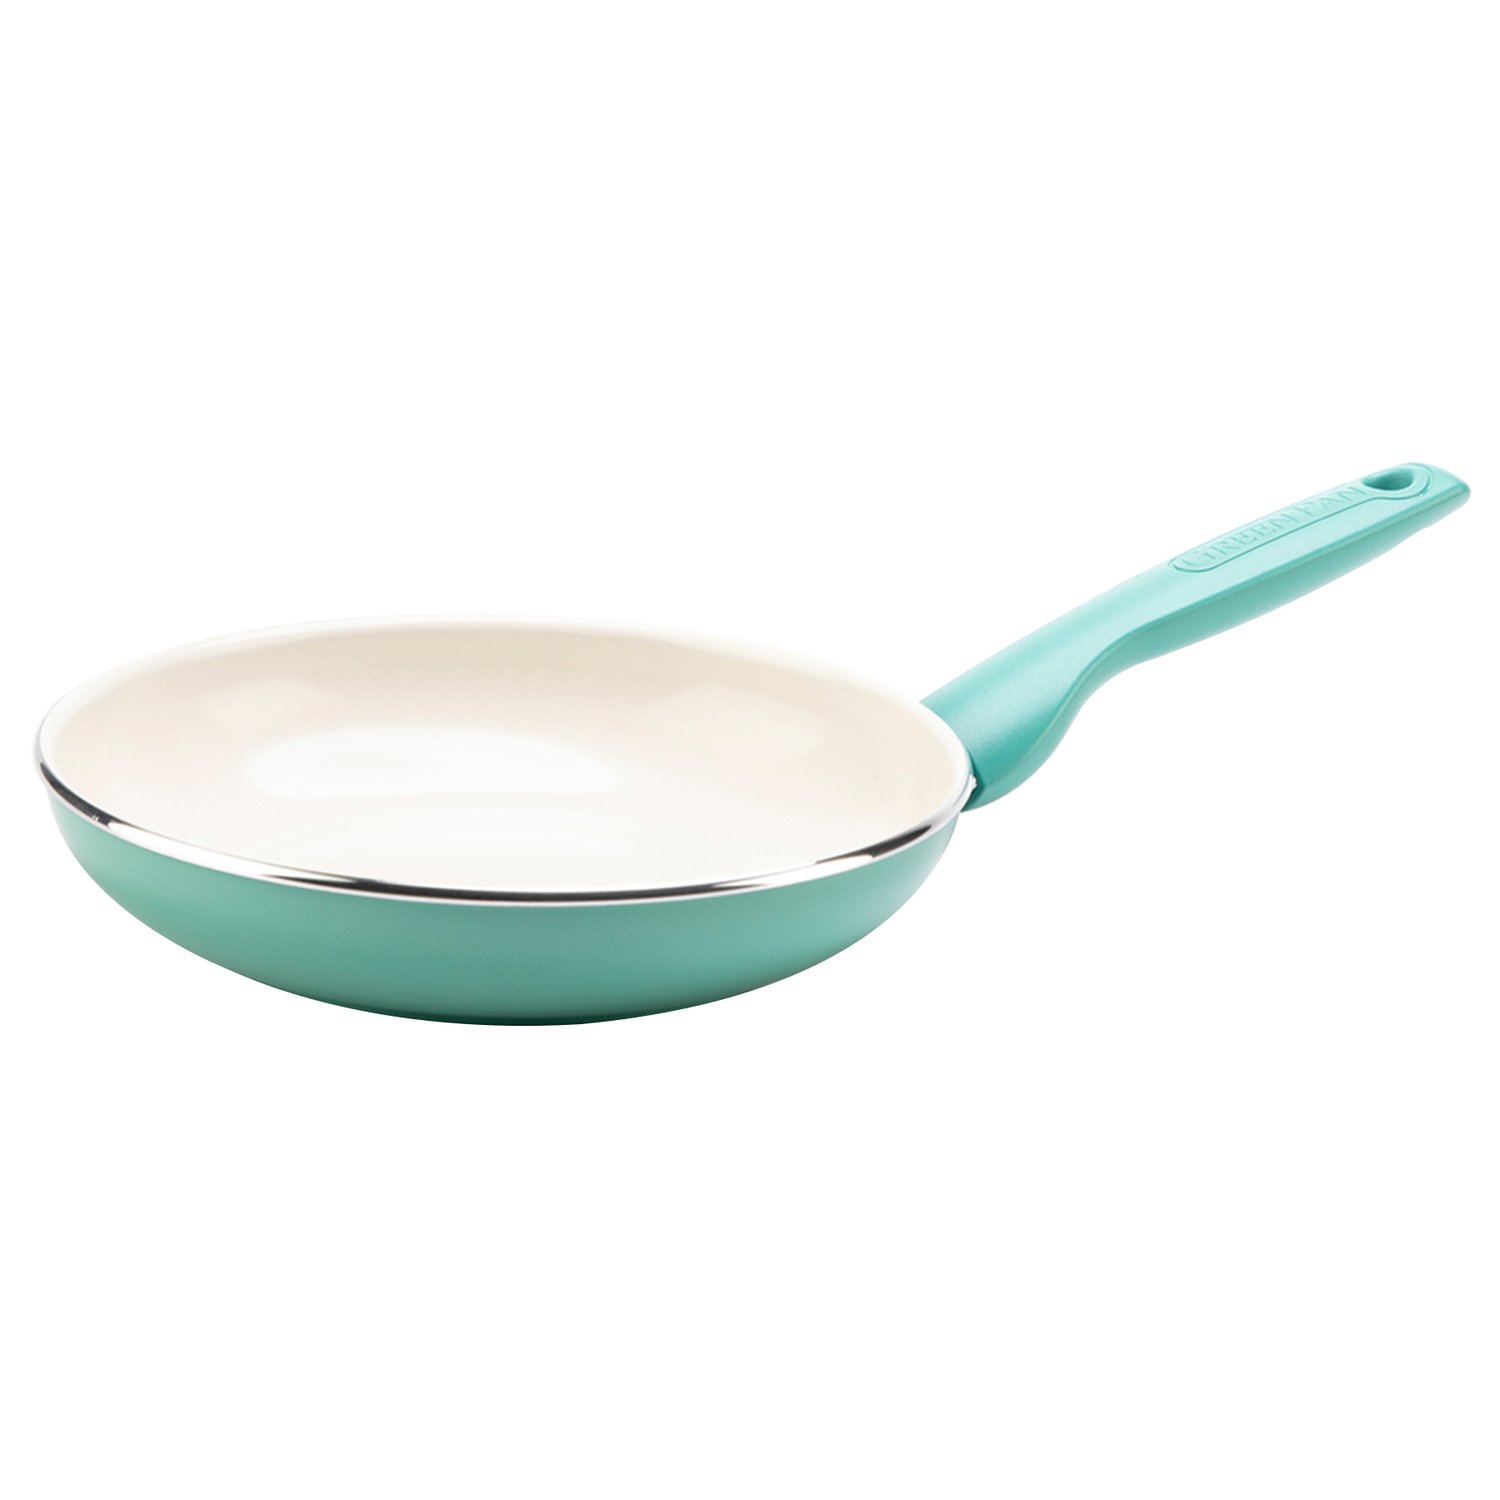 Photos - Other Accessories Green Pan GreenPan Rio Ceramic Coated Aluminum Fry Pan 7 in. Turquoise CC002478-001 